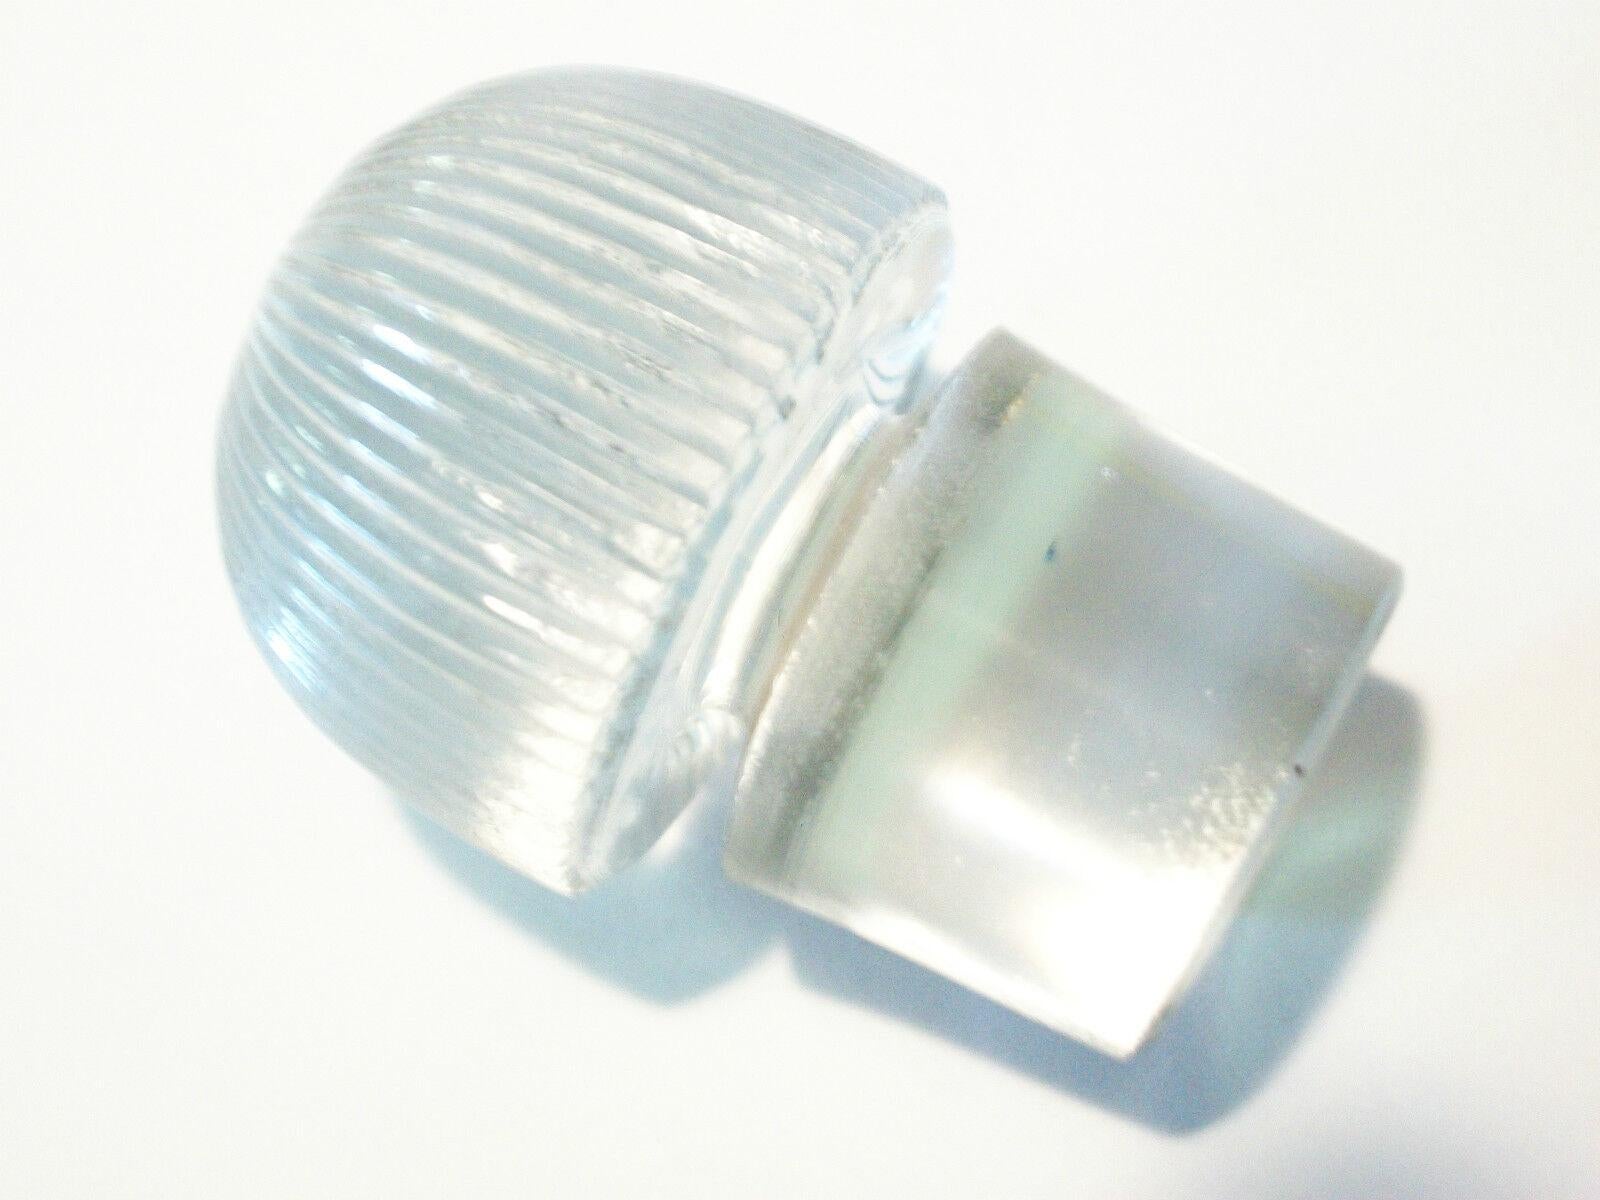 R. LALIQUE - Antique Stopper - Clear Glass - Mushroom Shape - Early 20th Century For Sale 2